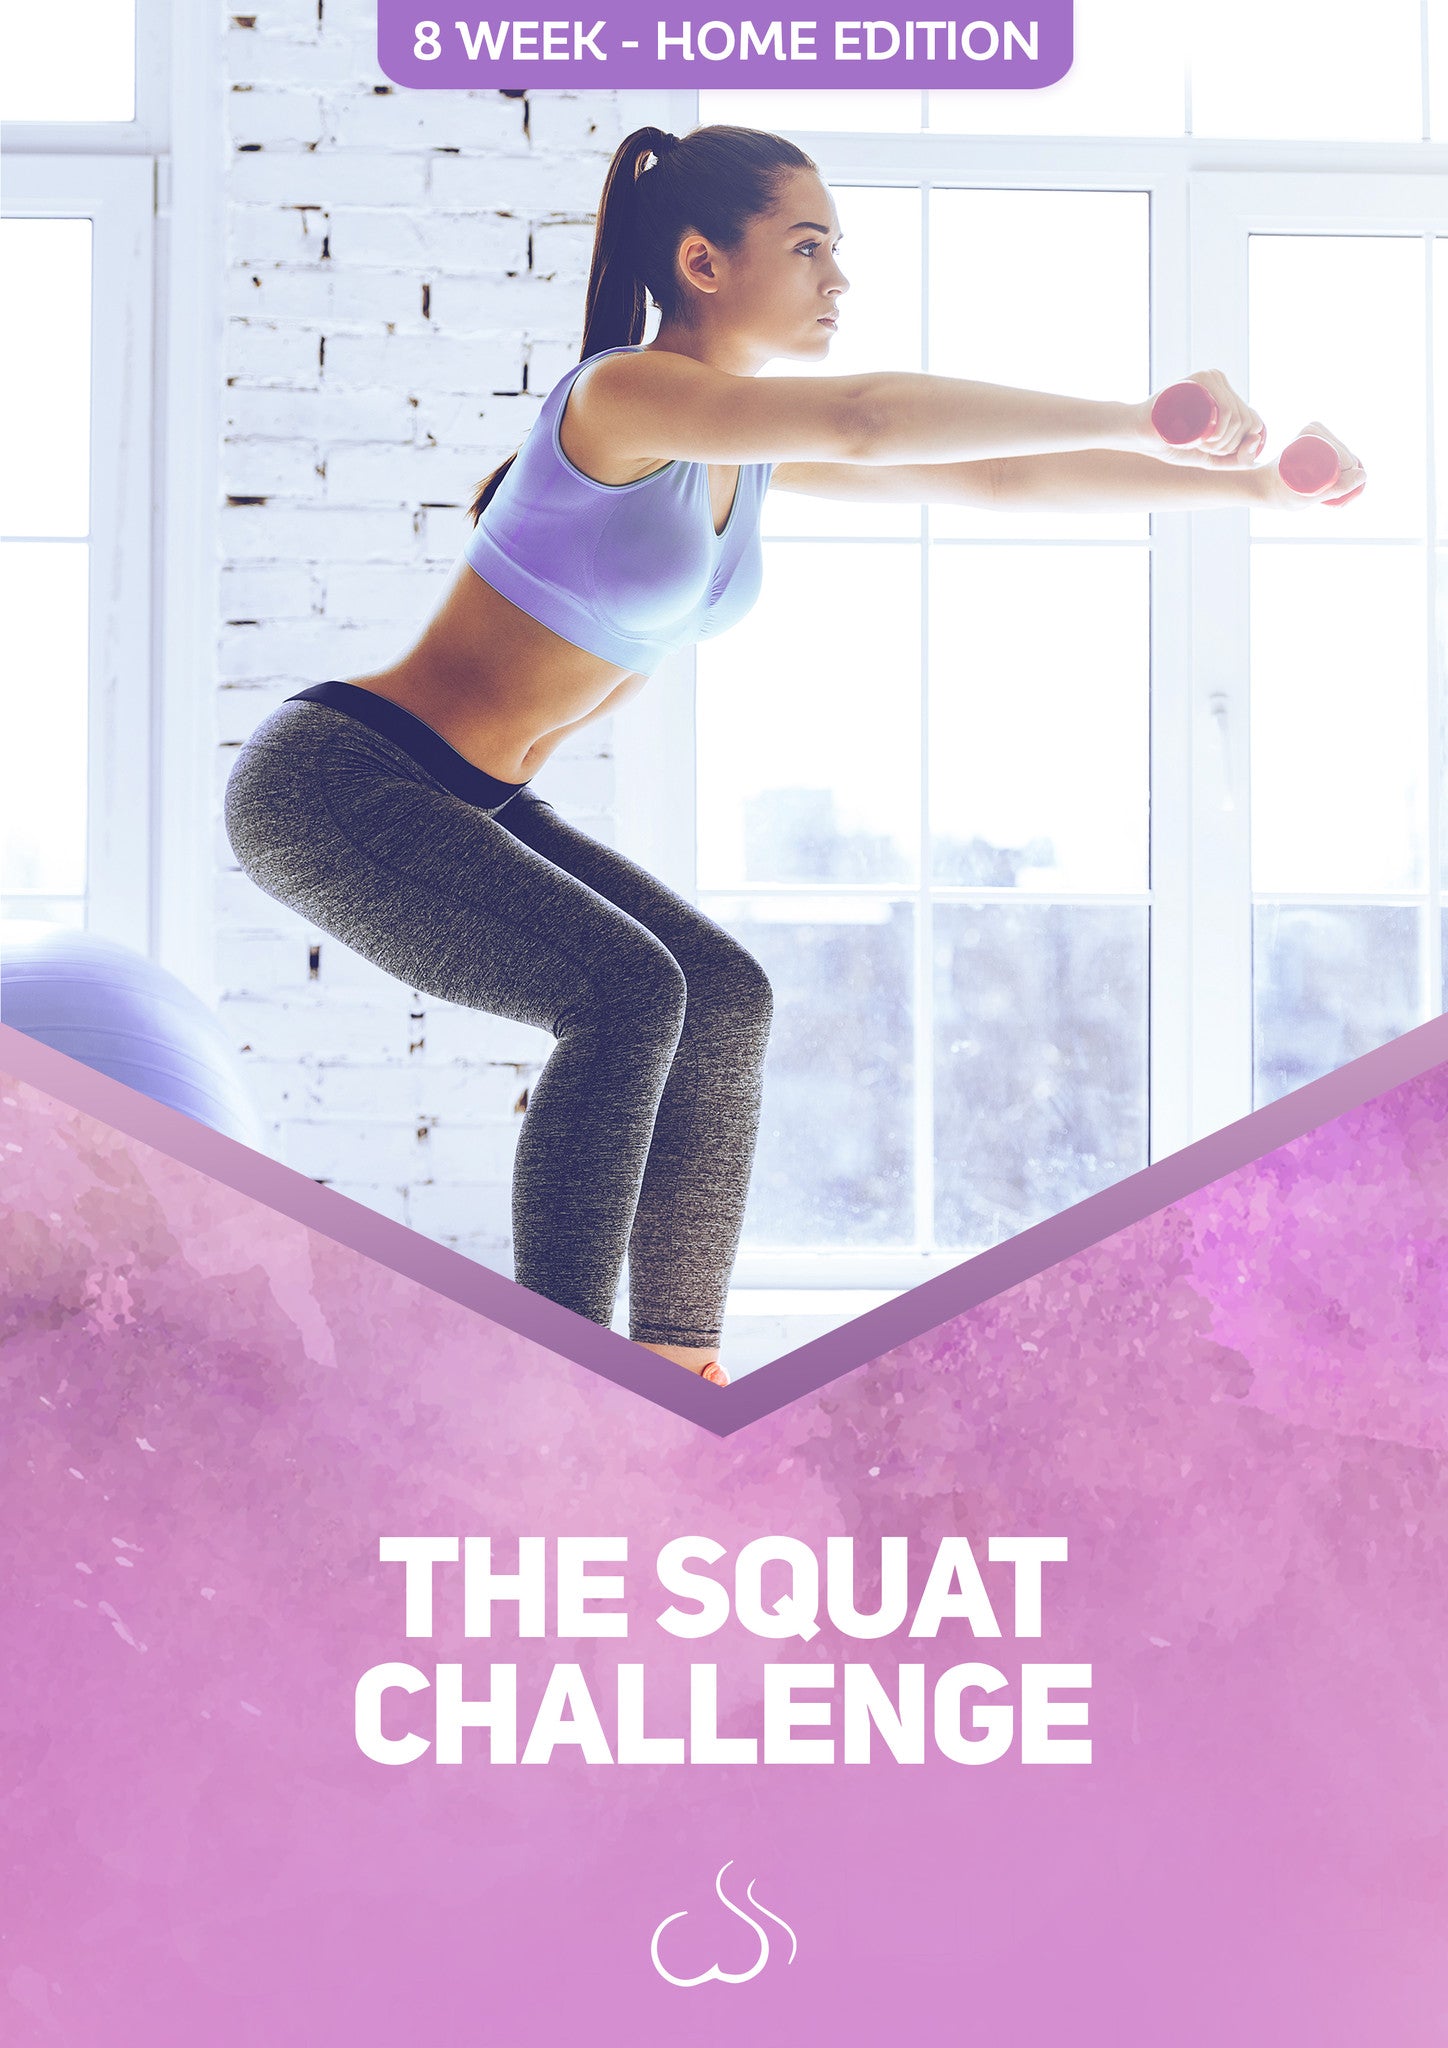 THE SQUAT CHALLENGE 8 weeks - Home edition 2.1